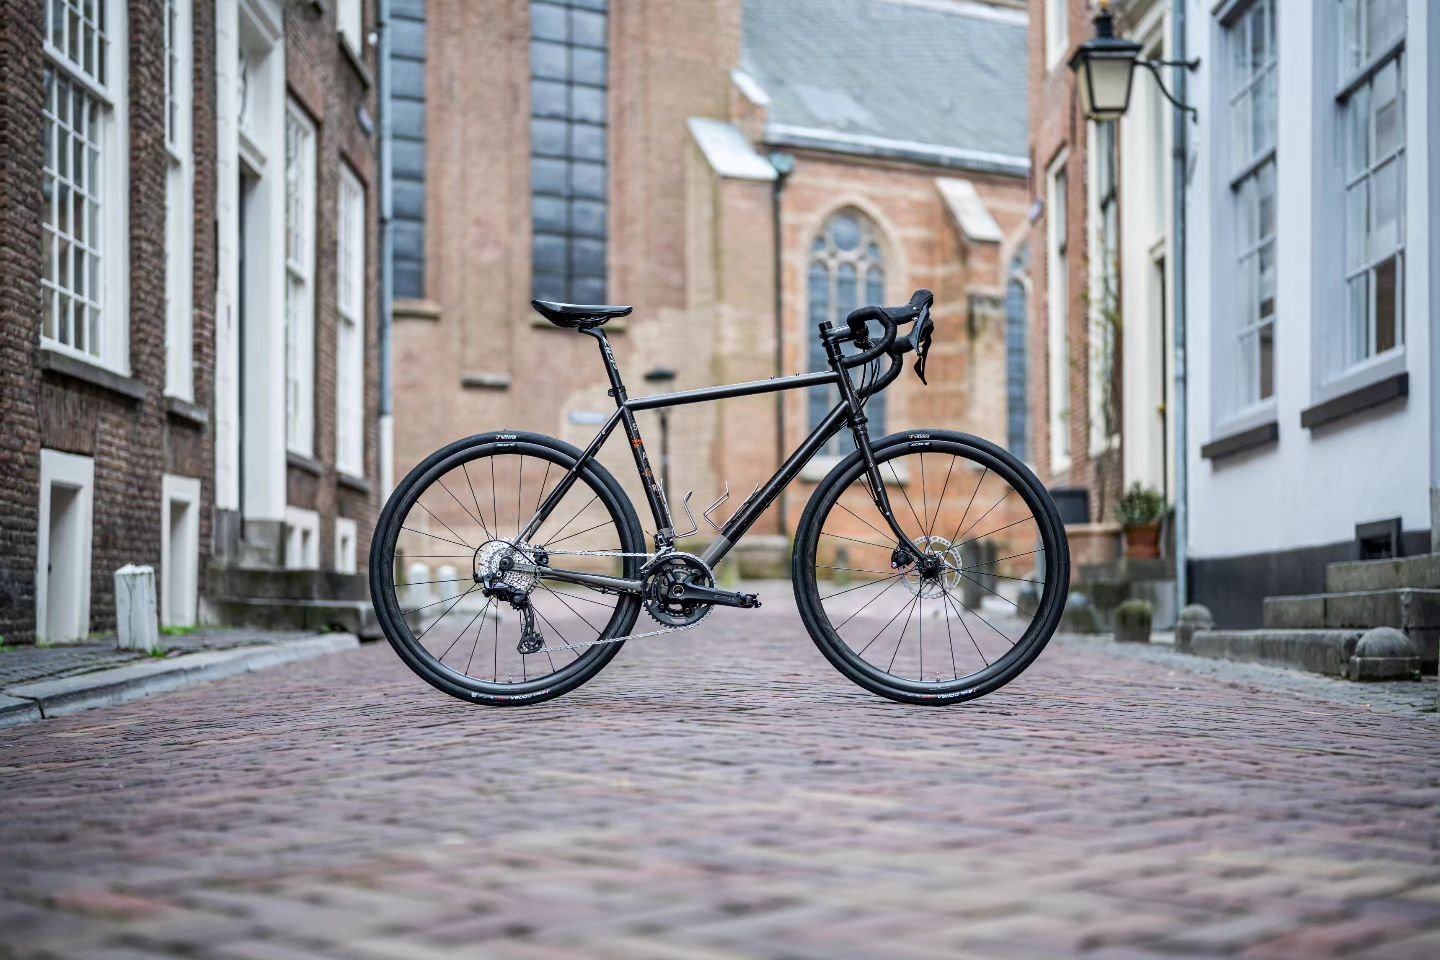 This Stavanger has got us daydreaming and stargazing 🤩
I get stoked when we get to build a bike I've been eyeballing for a while and this bike really exceeded my expectations.

Made in EU, this 4130 adventure bike is ready for whatever you're going 